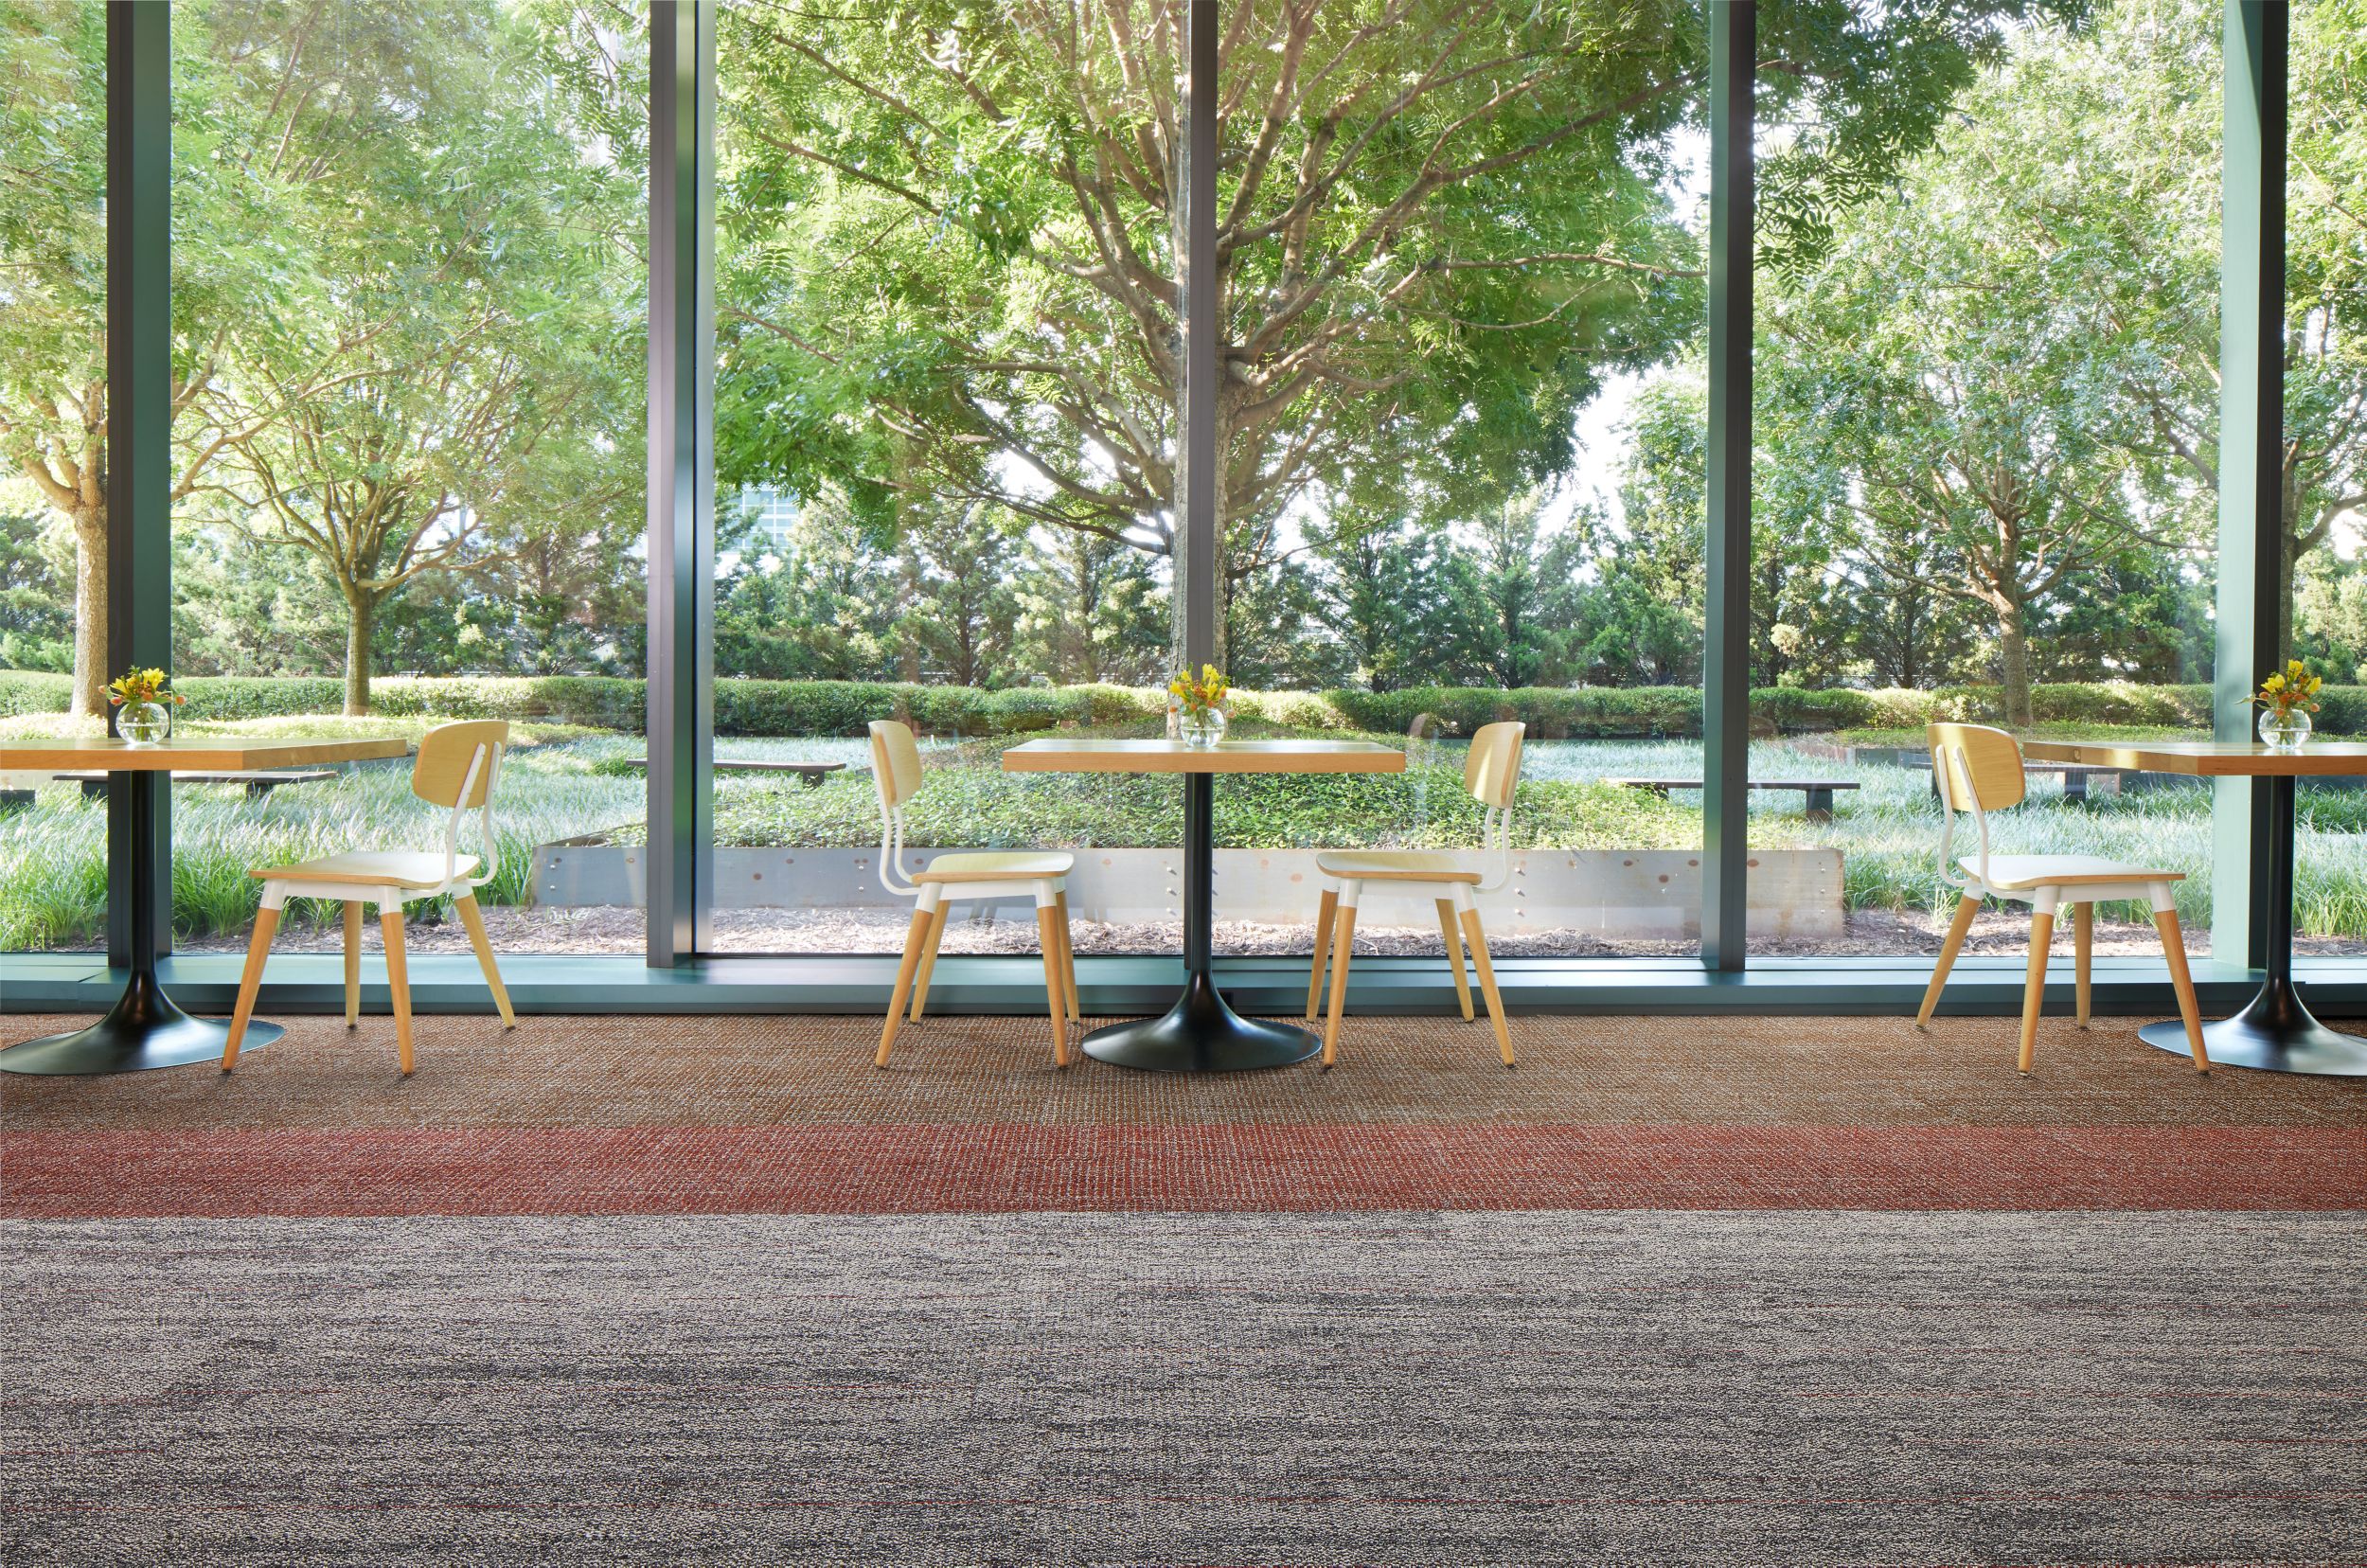 Interface Open Air Stria 402 and Open Ended carpet tile in lobby setting with tables and open plan windows imagen número 4